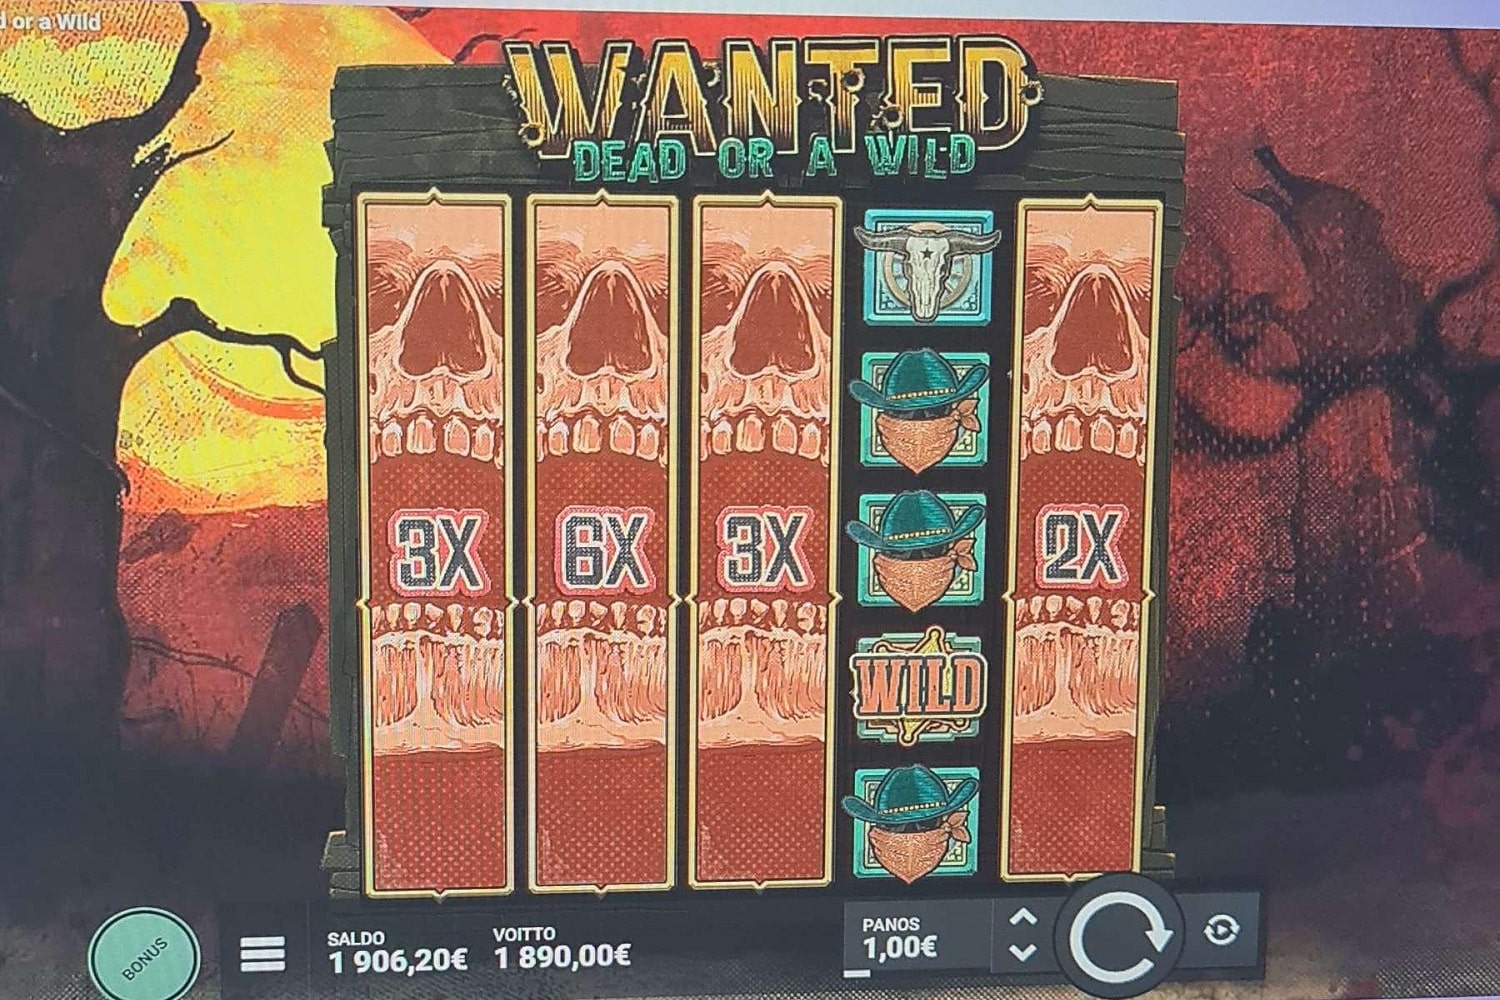 Wanted Dead Or a Wild Casino win picture by jounijuhani 1890€ 1890x 2.4.2023